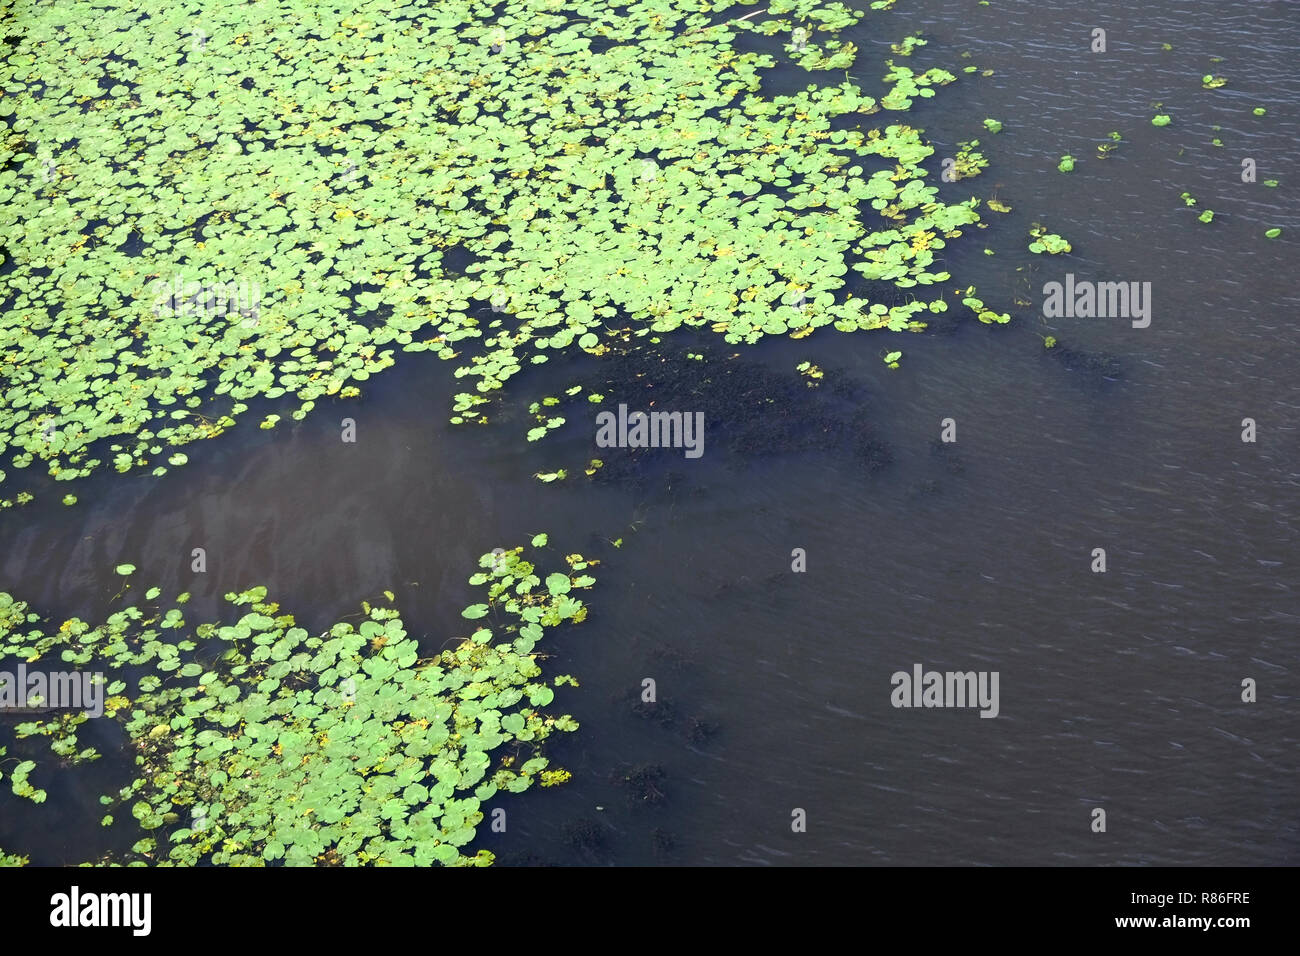 Green carpet from lot of plants with round leaves floating on water surface top view Stock Photo